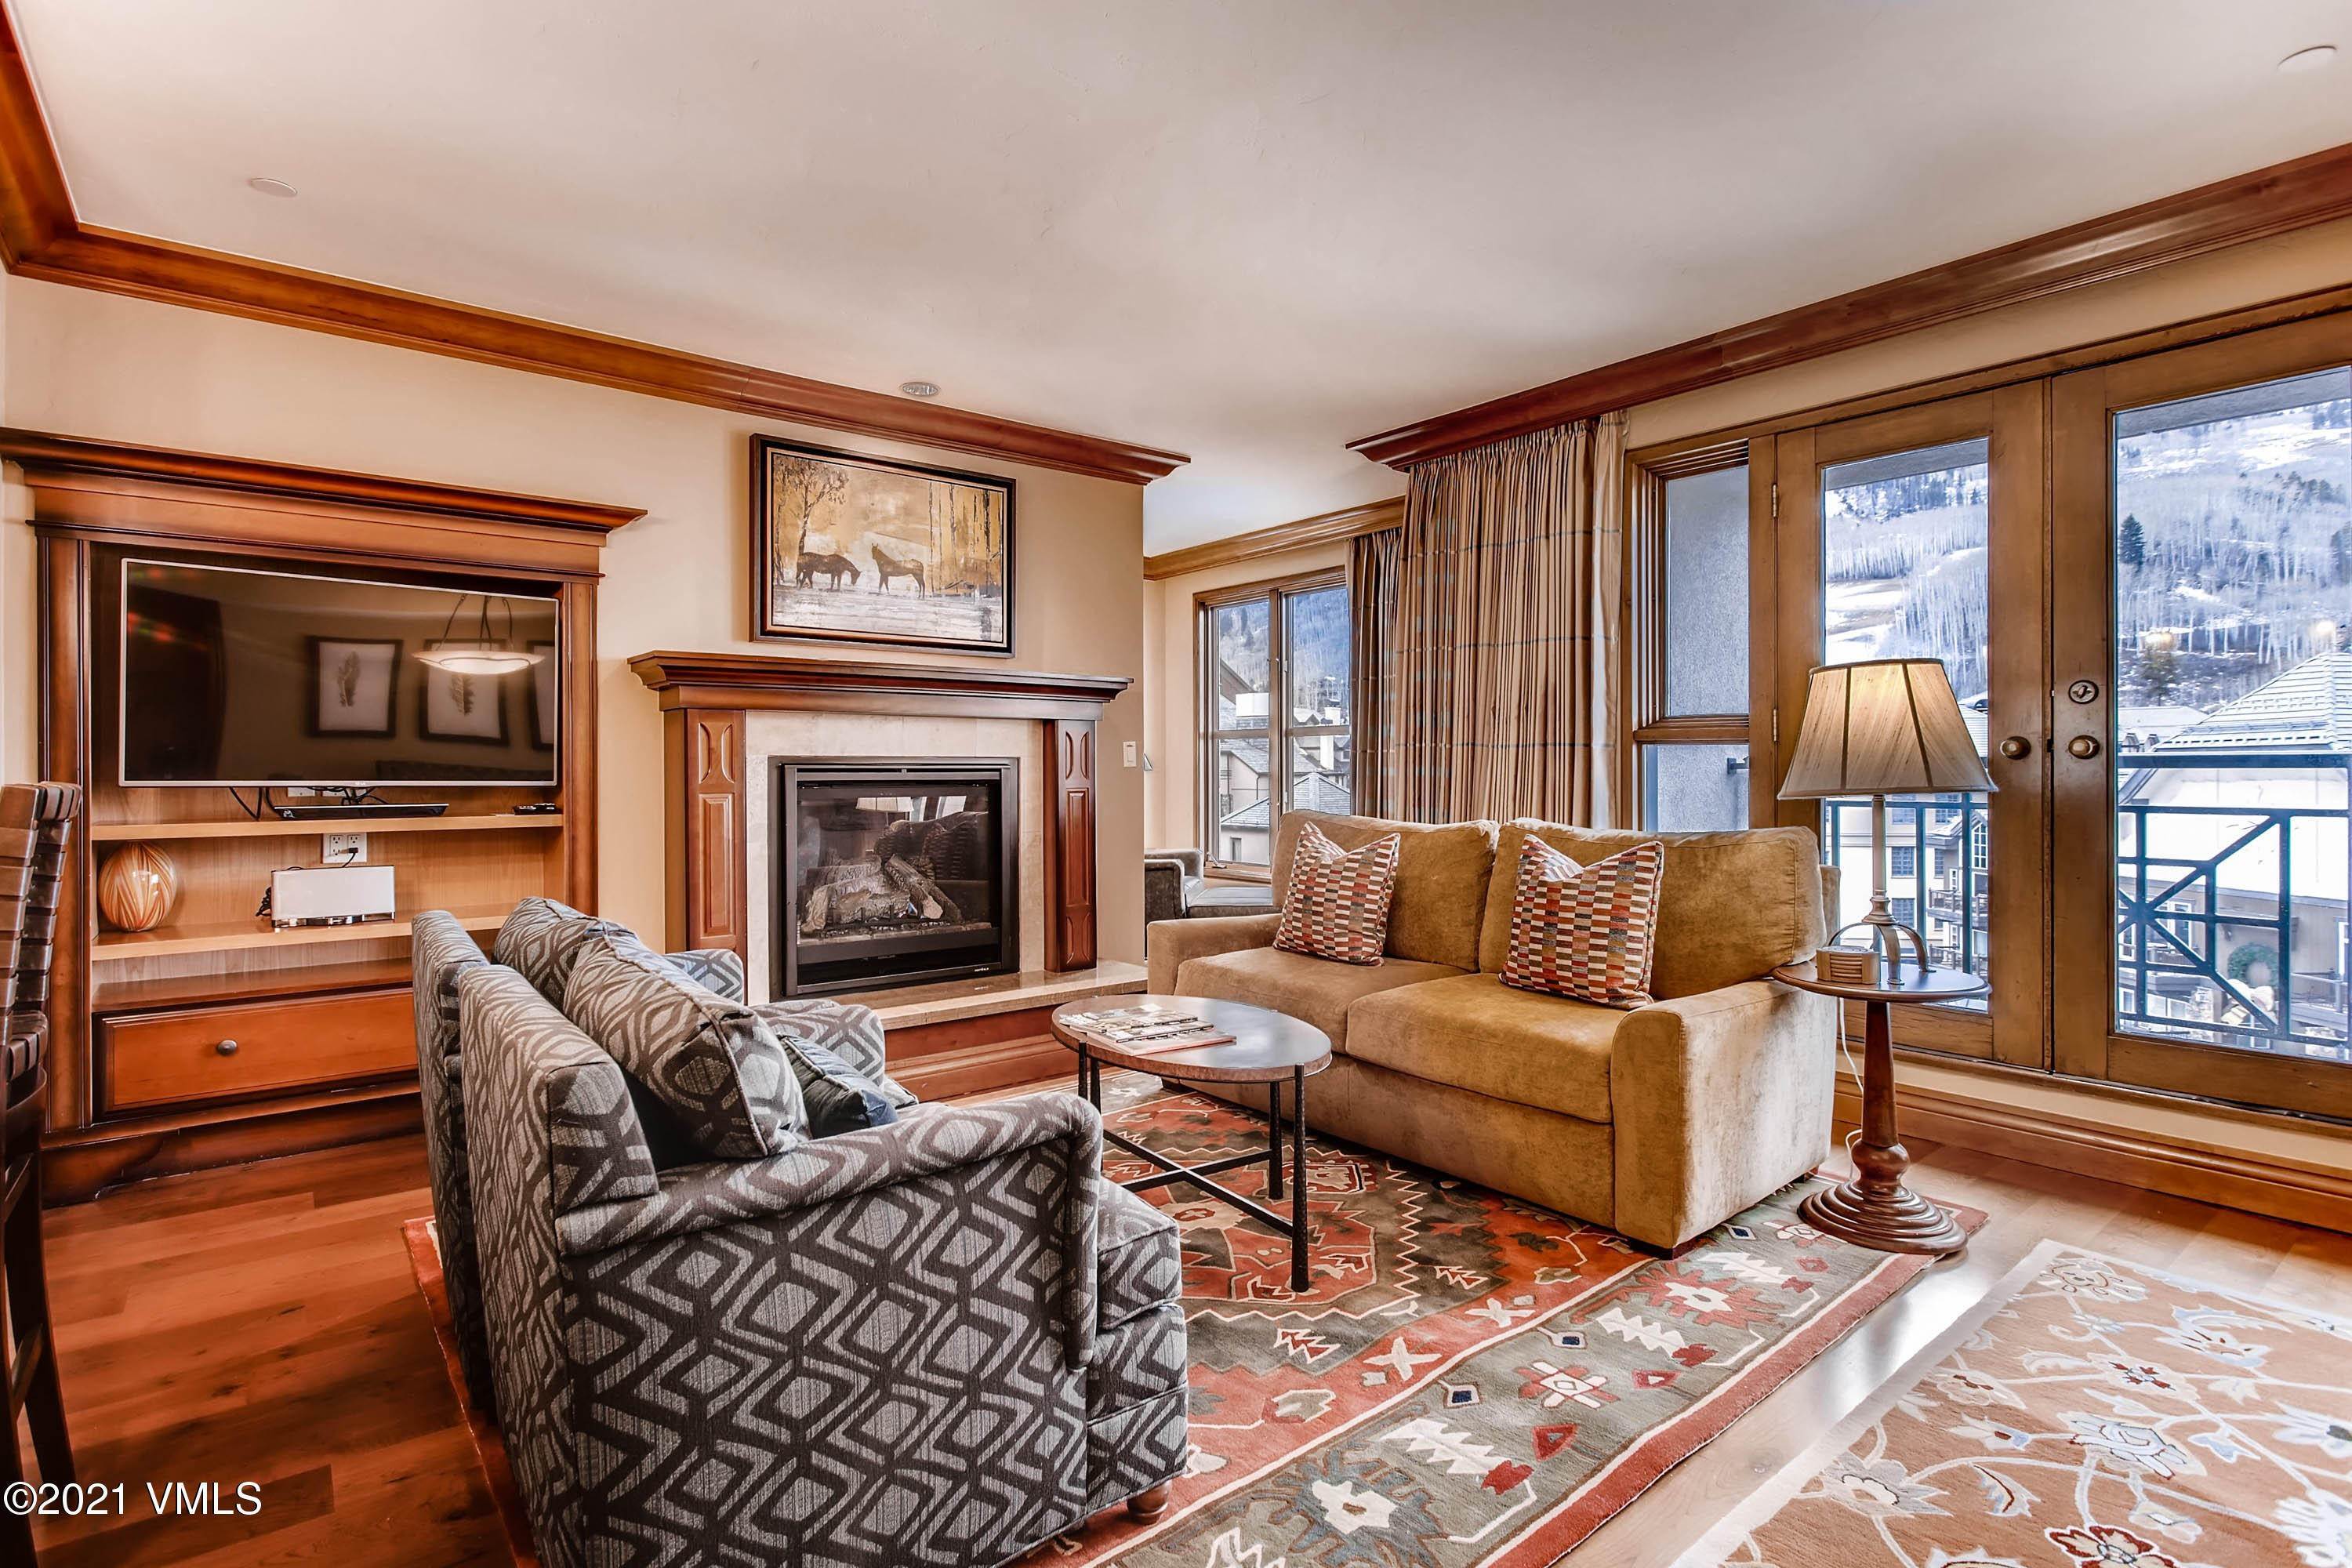 Fractional Ownership Property for Active at 100-Week 8 E Thomas Place 3053-Week 8 plus 10 Beaver Creek, Colorado 81620 United States